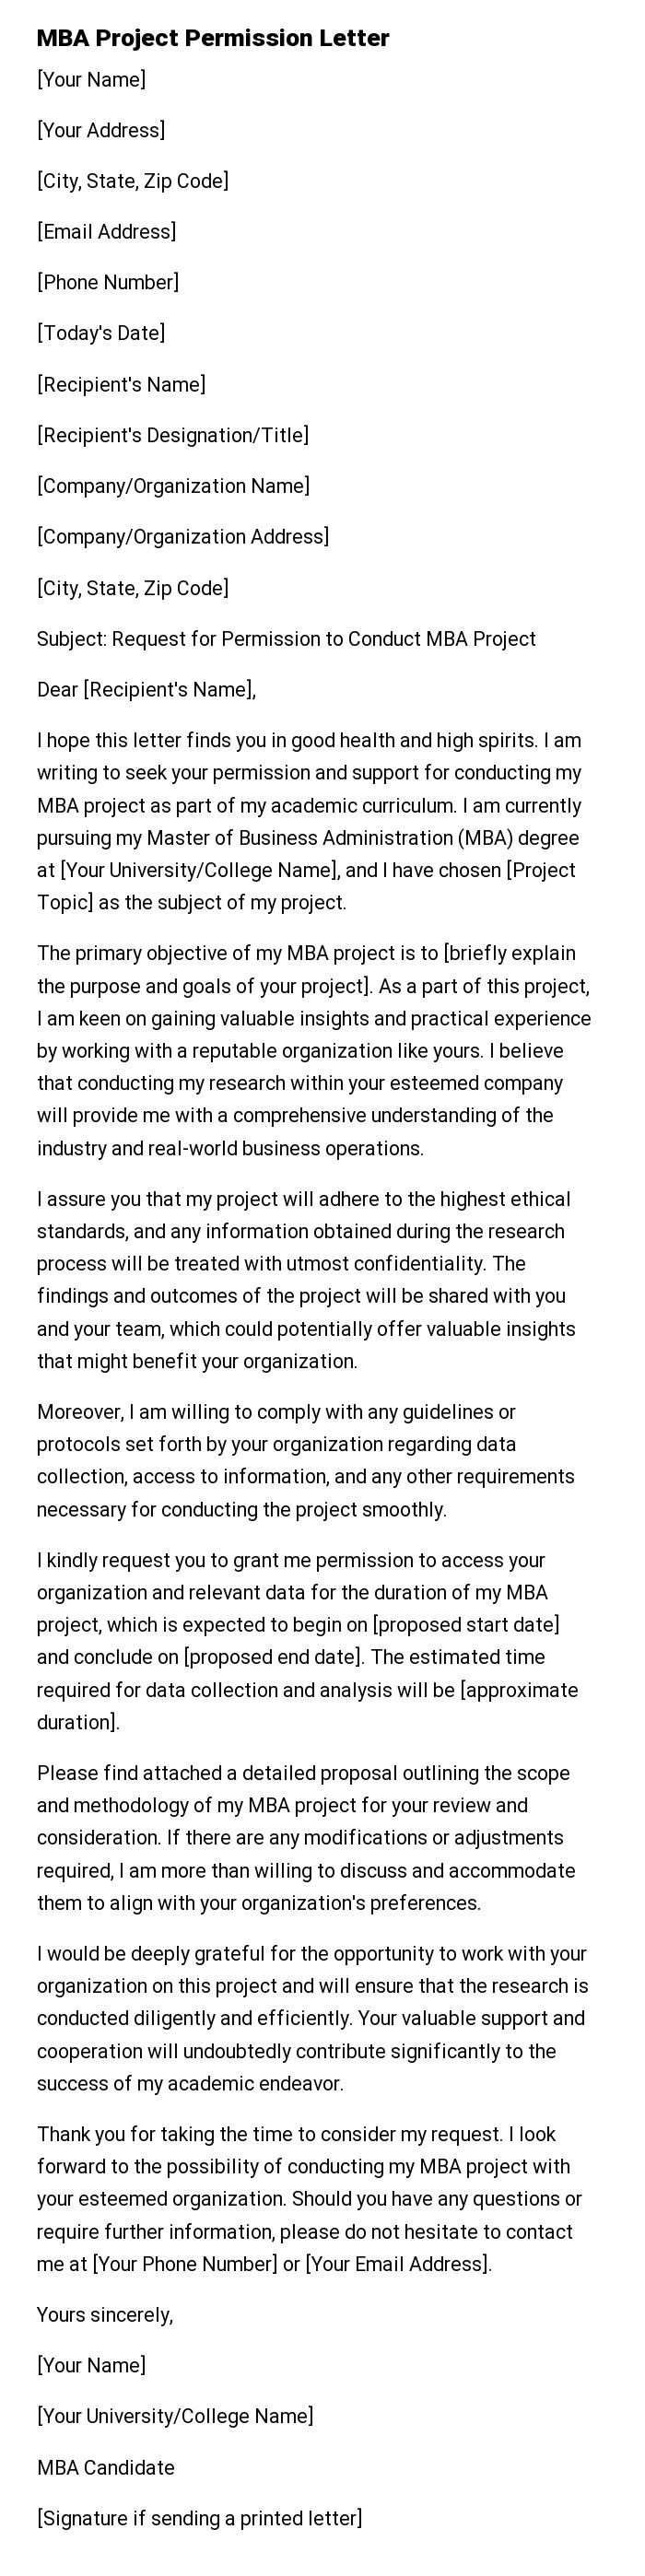 MBA Project Permission Letter